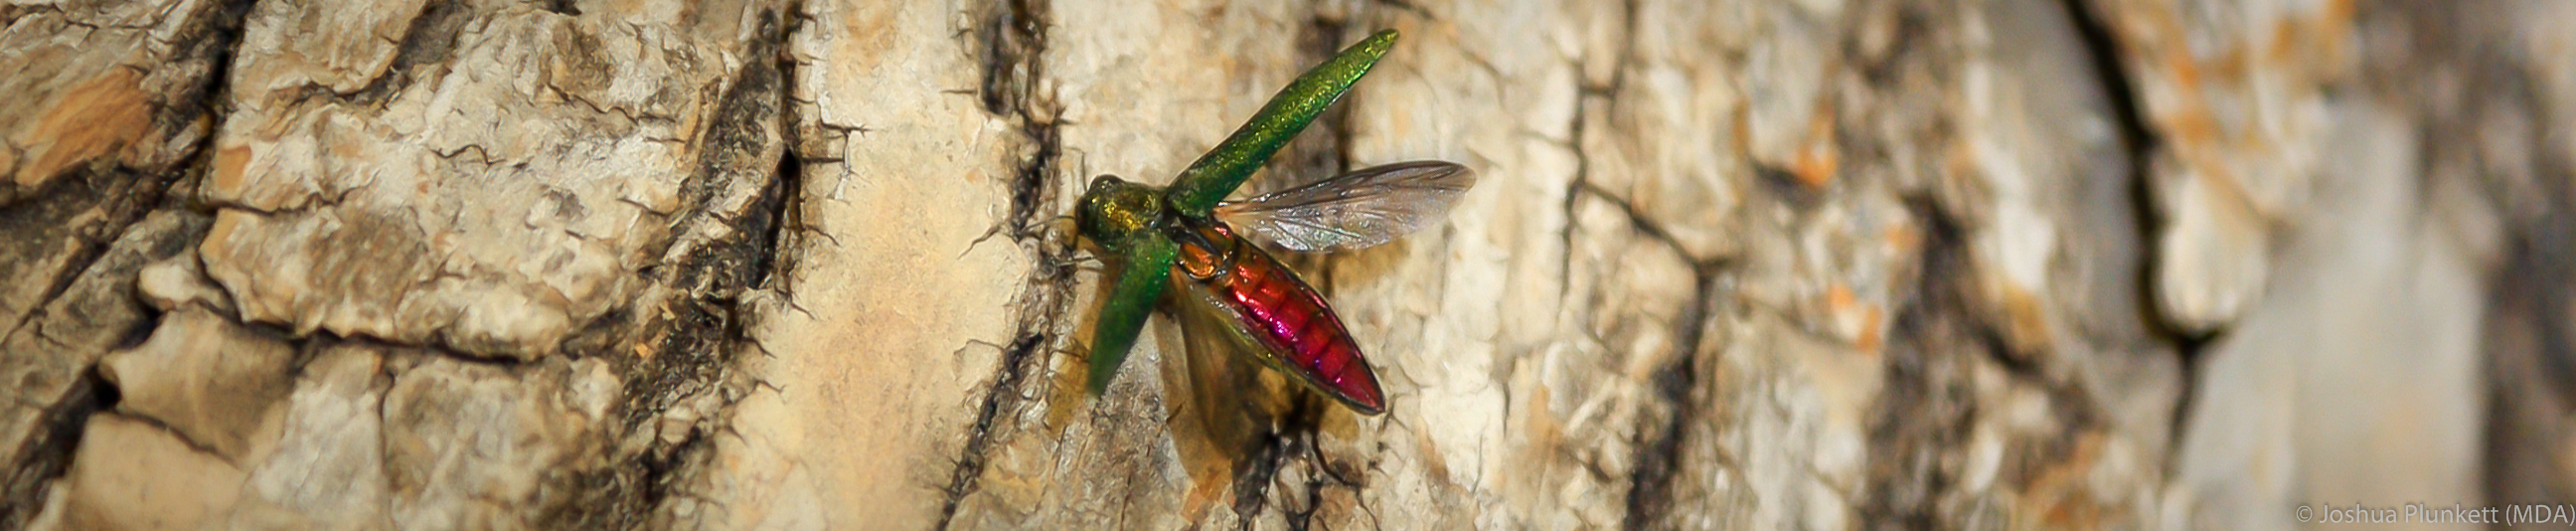 Emerald ash borer, showing extended wings.